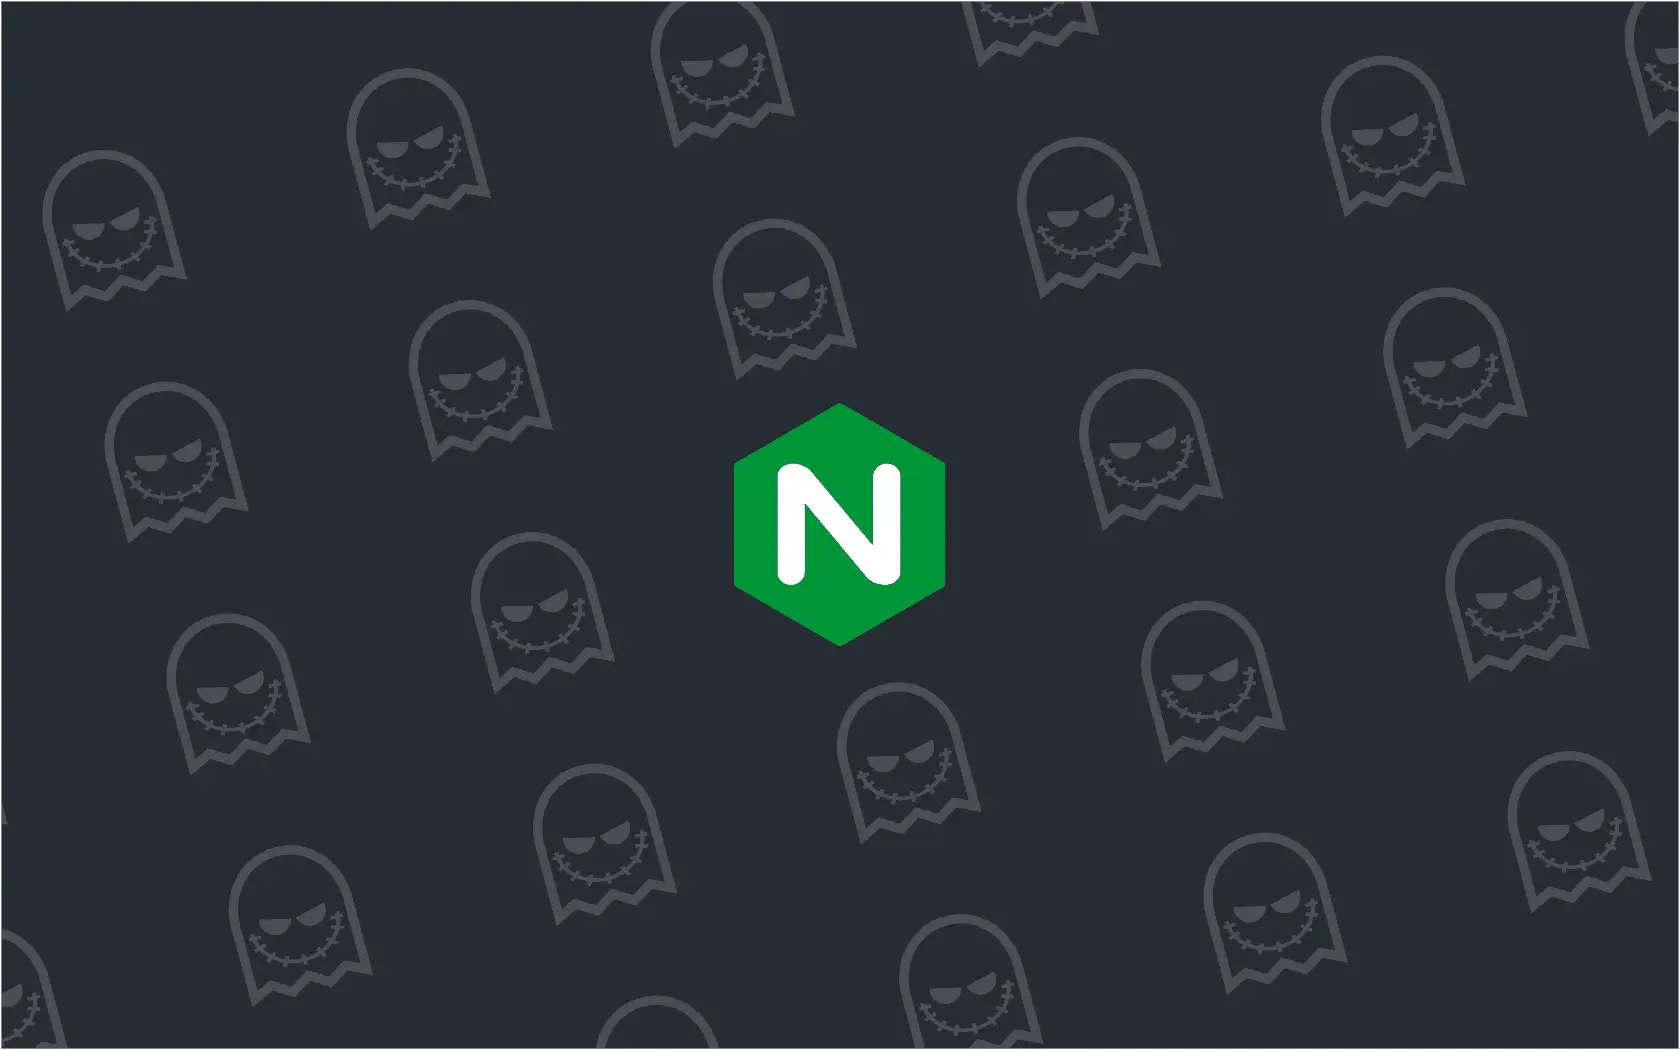 Optimise your Ghost blog for Raspberry Pi using NGINX